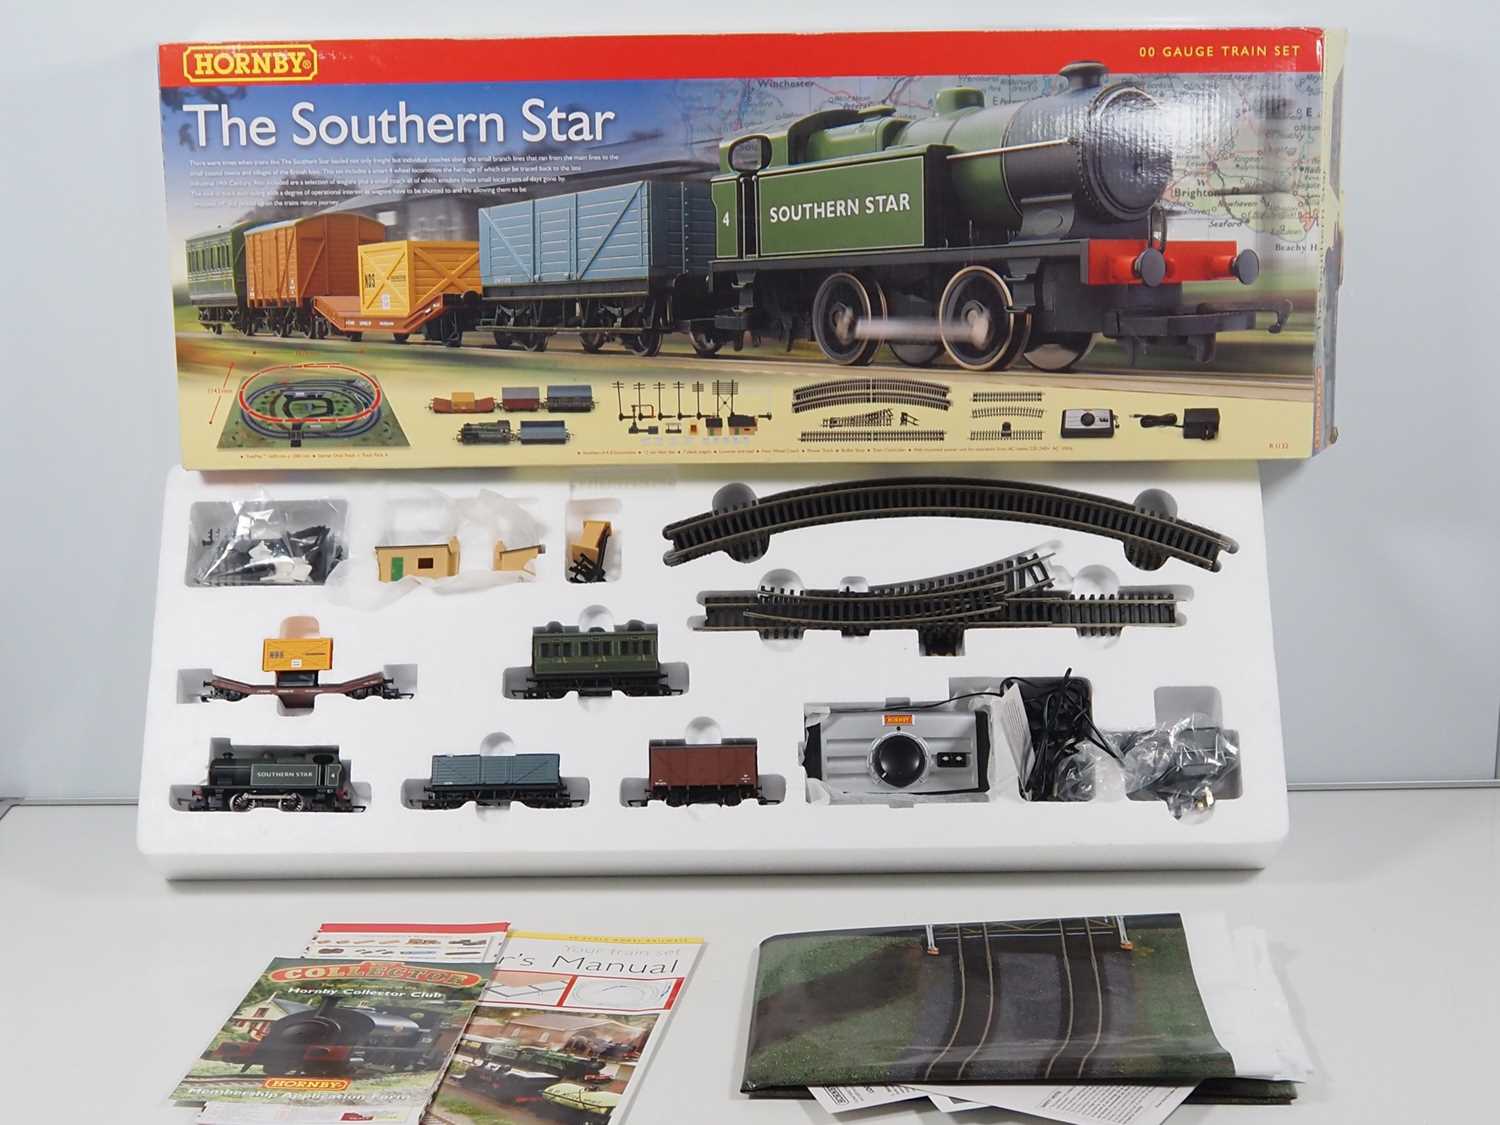 A HORNBY R1132 OO gauge 'The Southern Star' train set comprising a steam loco, wagons, coach and